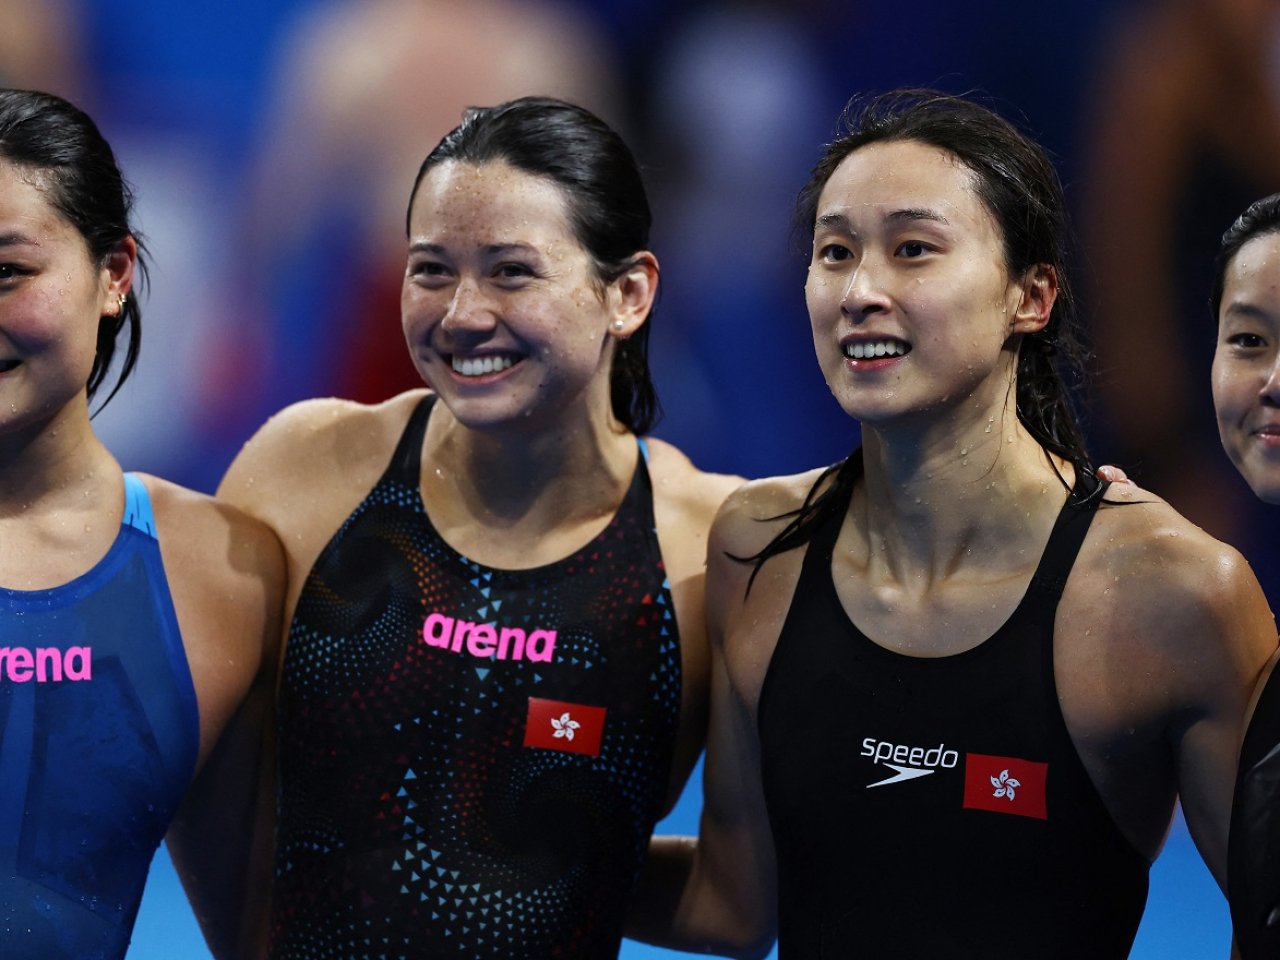 HK relay swimmers happy despite dropping out